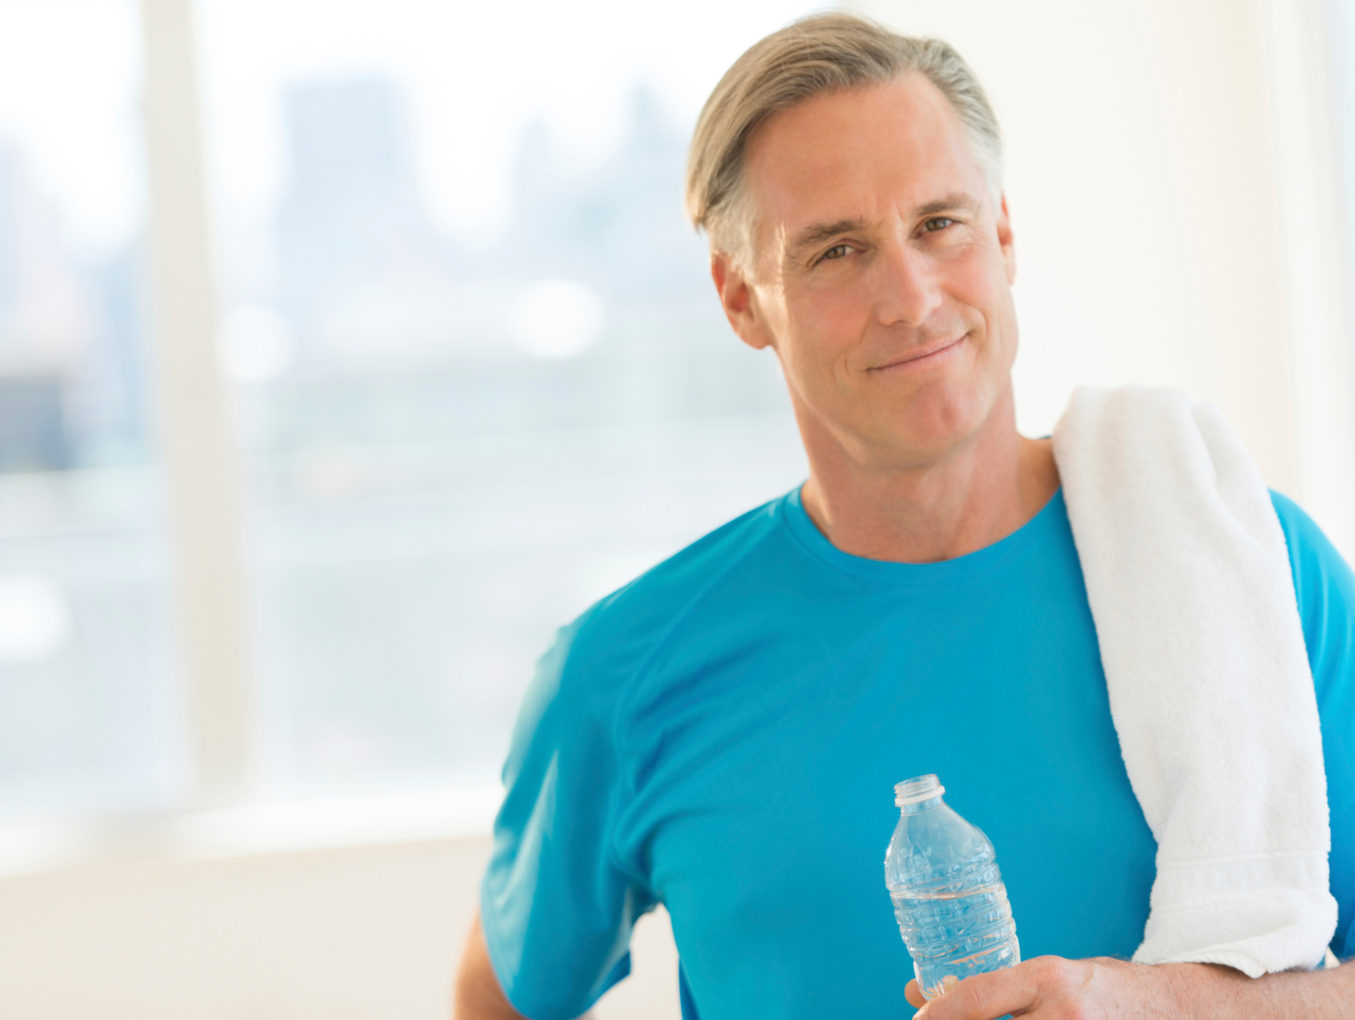 Testosterone therapy: Potential Benefits and Risks